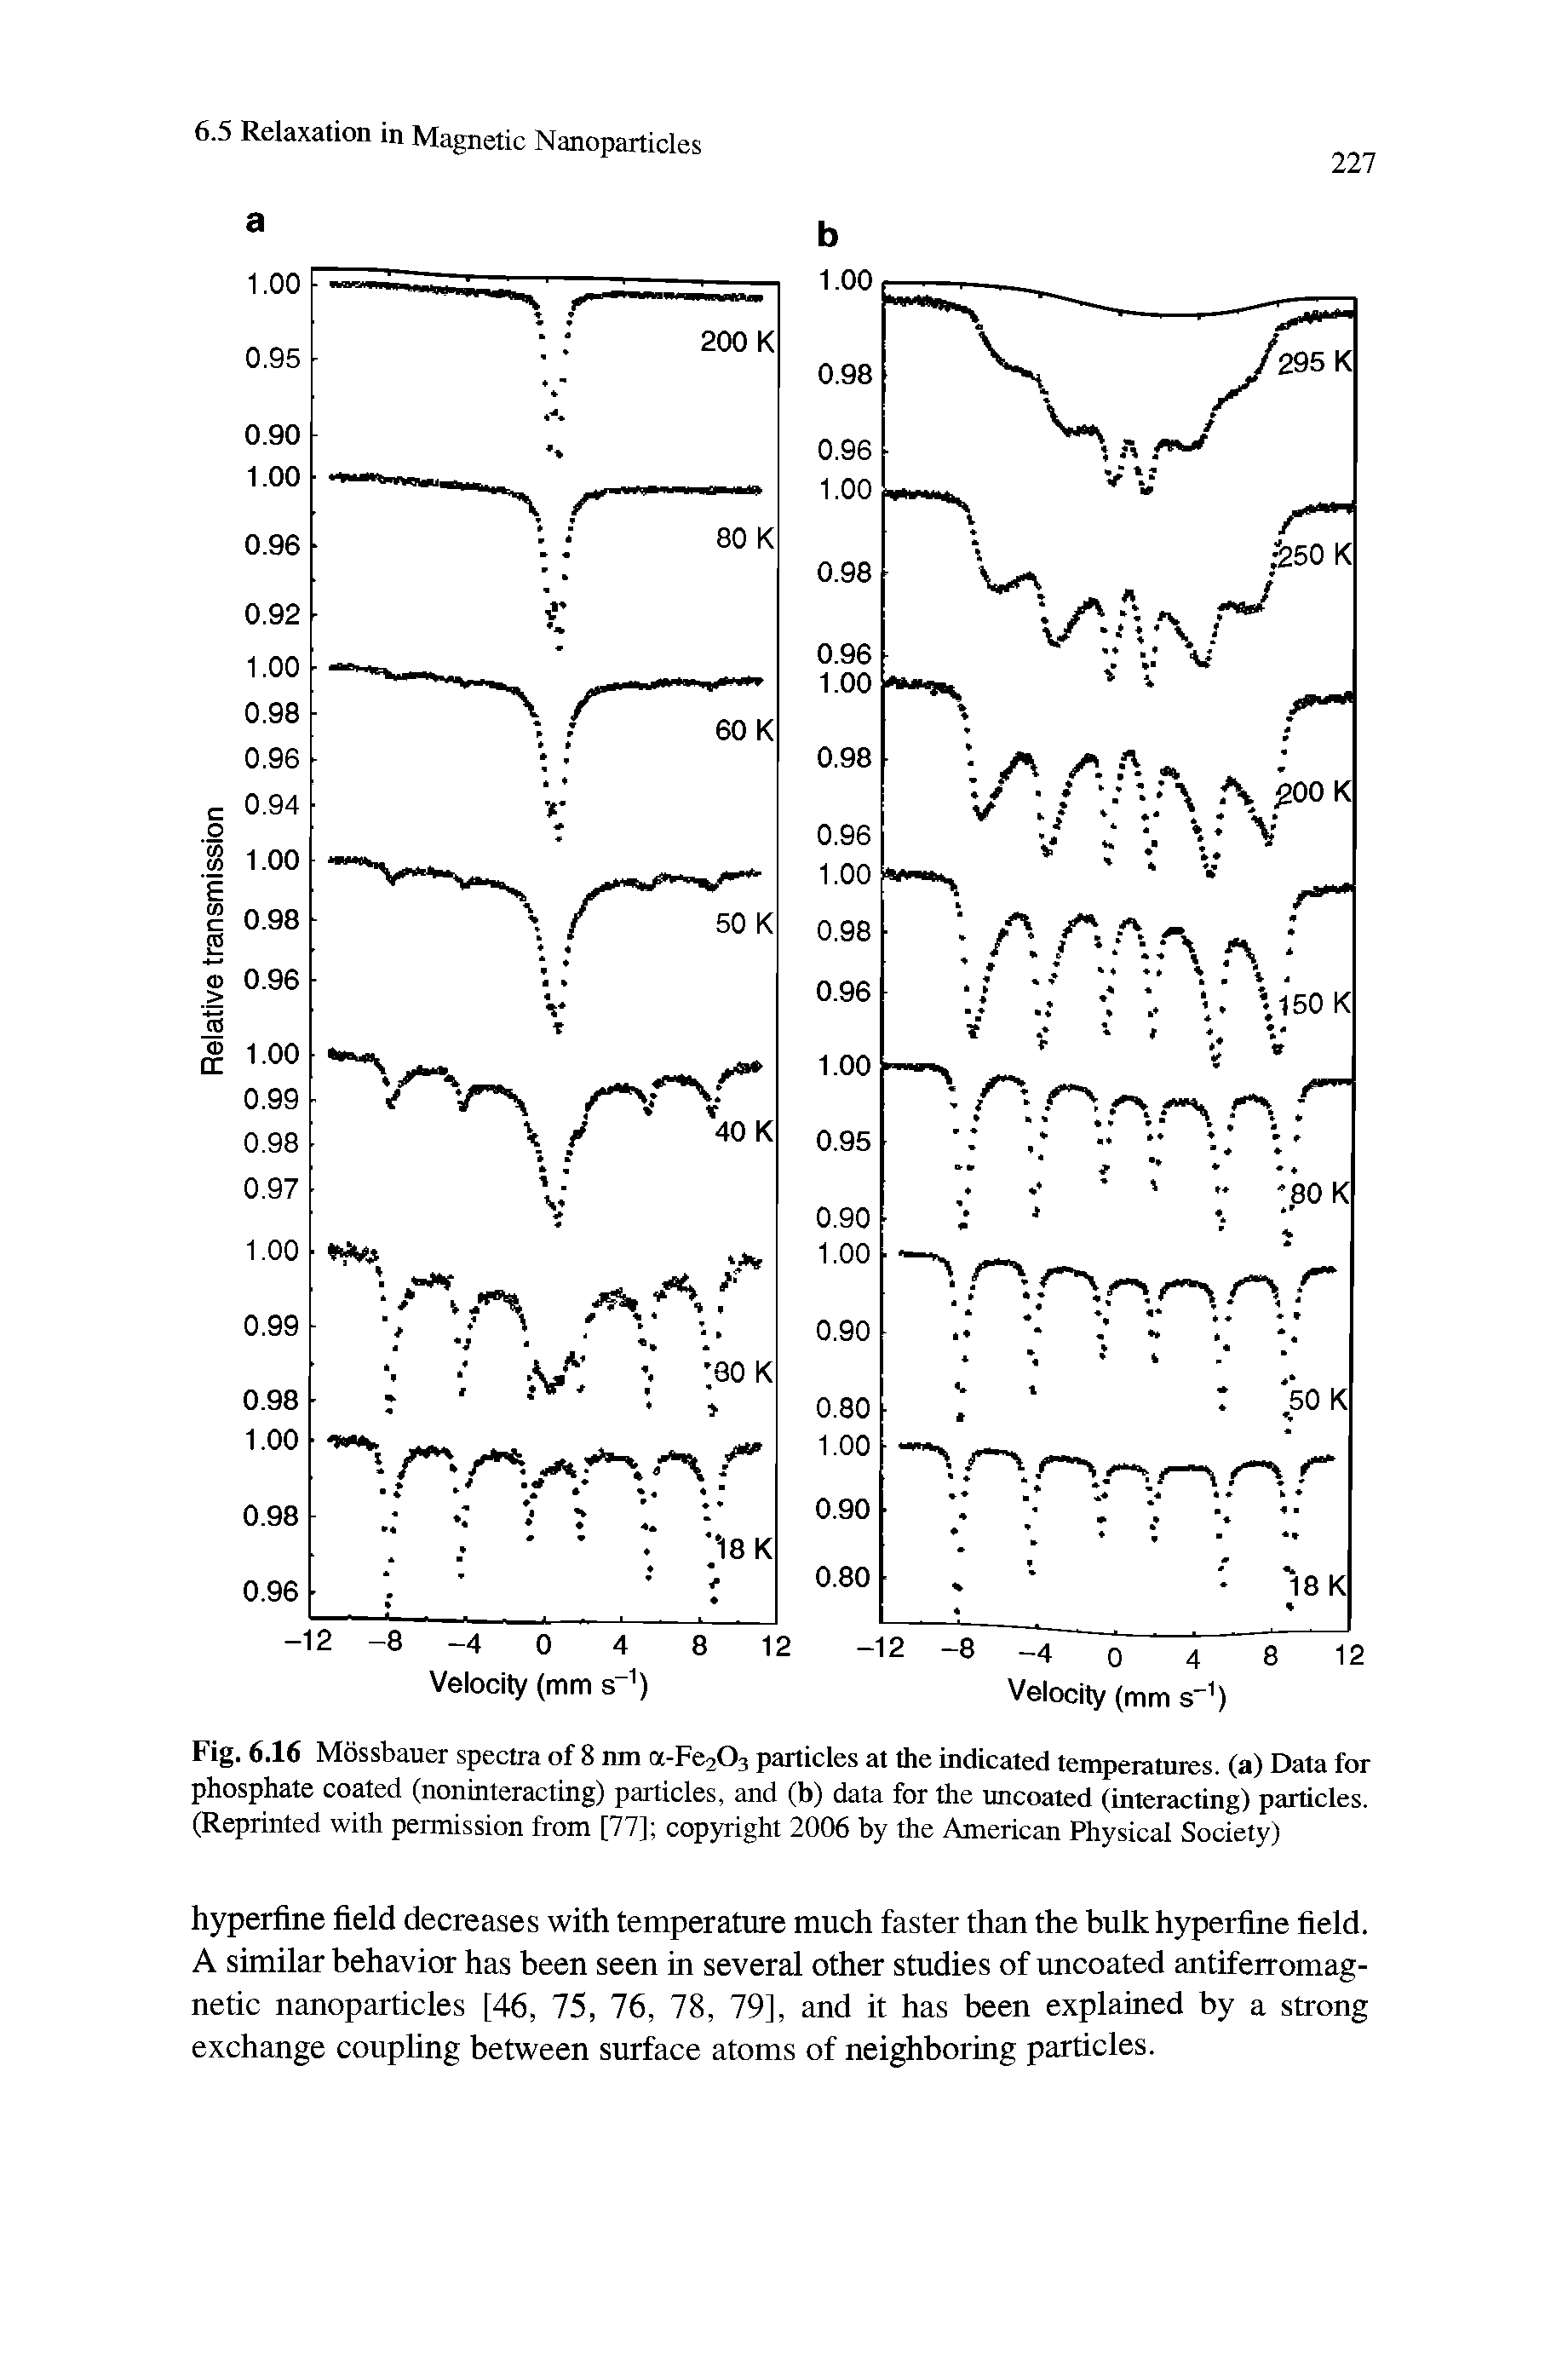 Fig. 6.16 Mossbauer spectra of 8 nm a-Fe203 particles at the indicated temperatures, (a) Data for phosphate coated (noninteracting) particles, and (b) data for the uncoated (interacting) particles. (Reprinted with permission from [77] copyright 2006 by the American Physical Society)...